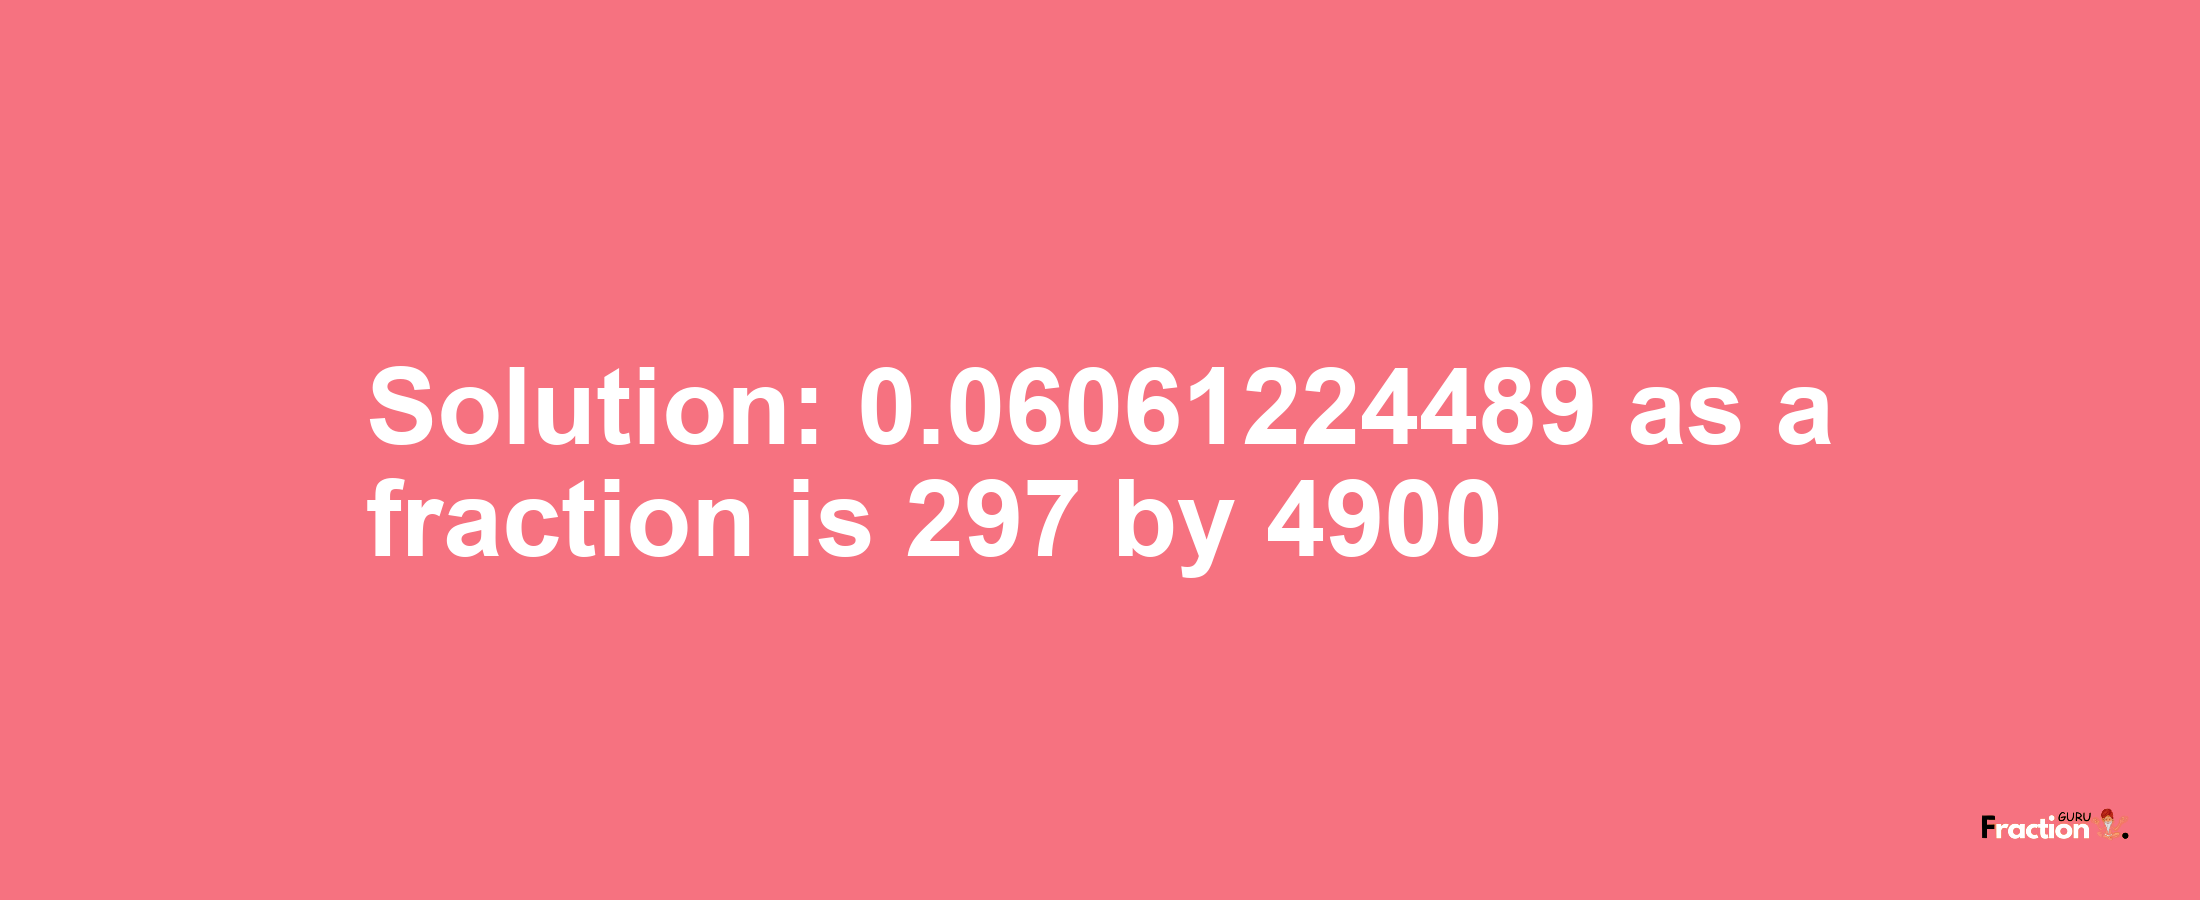 Solution:0.06061224489 as a fraction is 297/4900